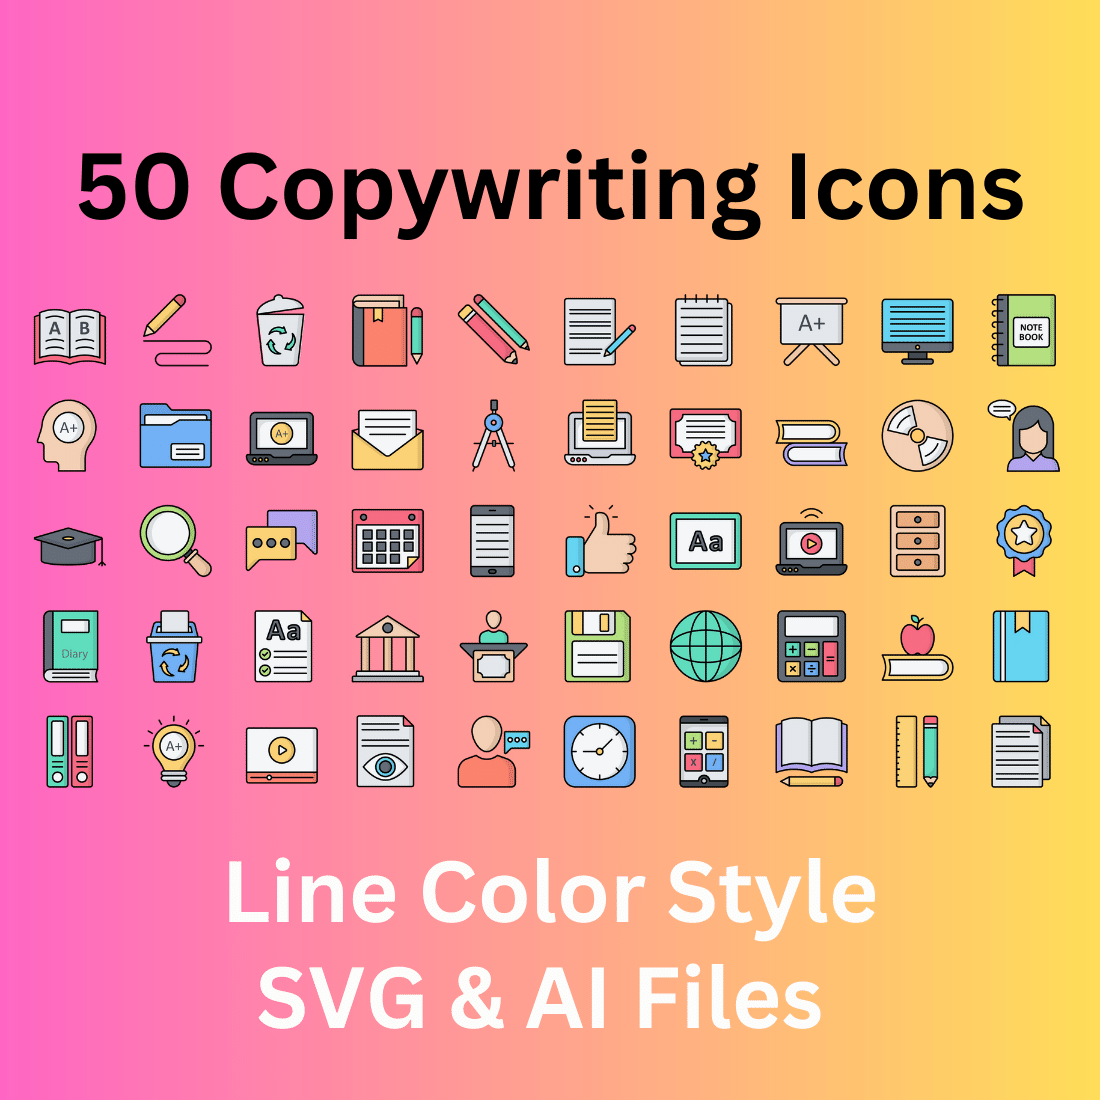 Copywriting Icon Set 50 Line Color Icons - SVG And AI Files cover image.